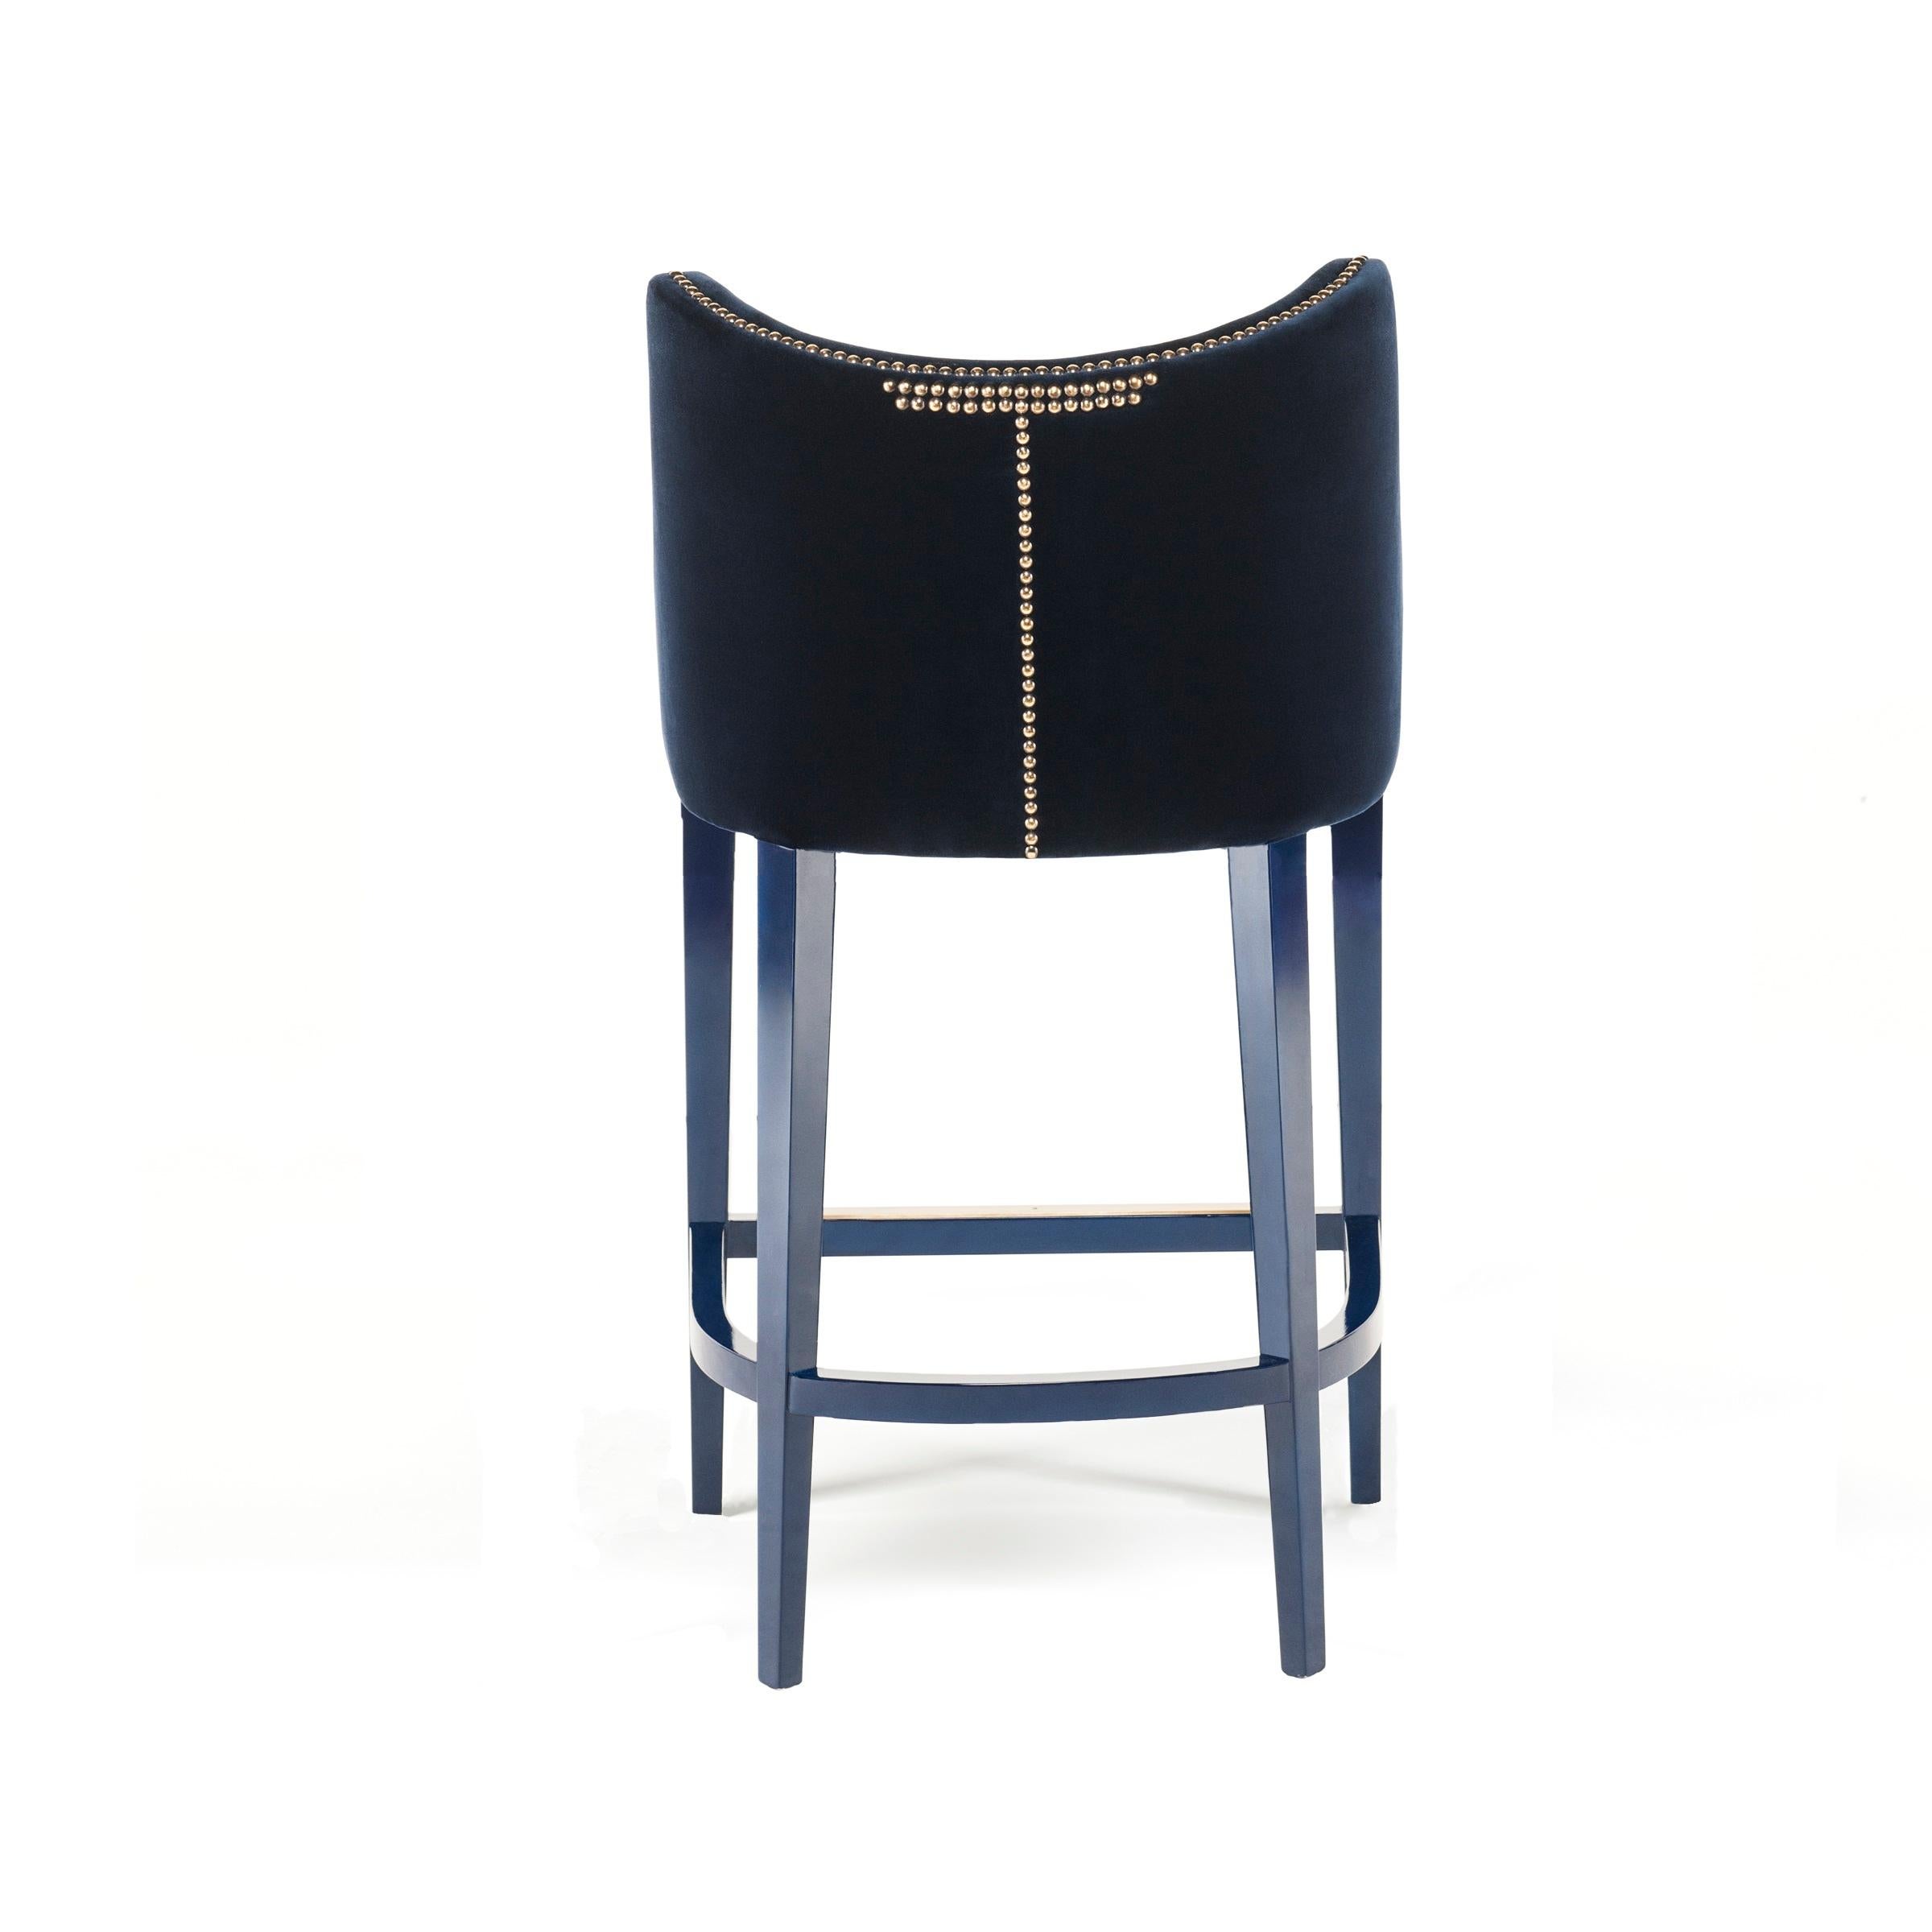 This barstool is the epitome of serenity inducing design. With an embracing Silhouette and luxurious deep seat, its sensuous curves and comfortable back perfectly adapt to the body. The nails adorning the curves and back of the pieces provide a